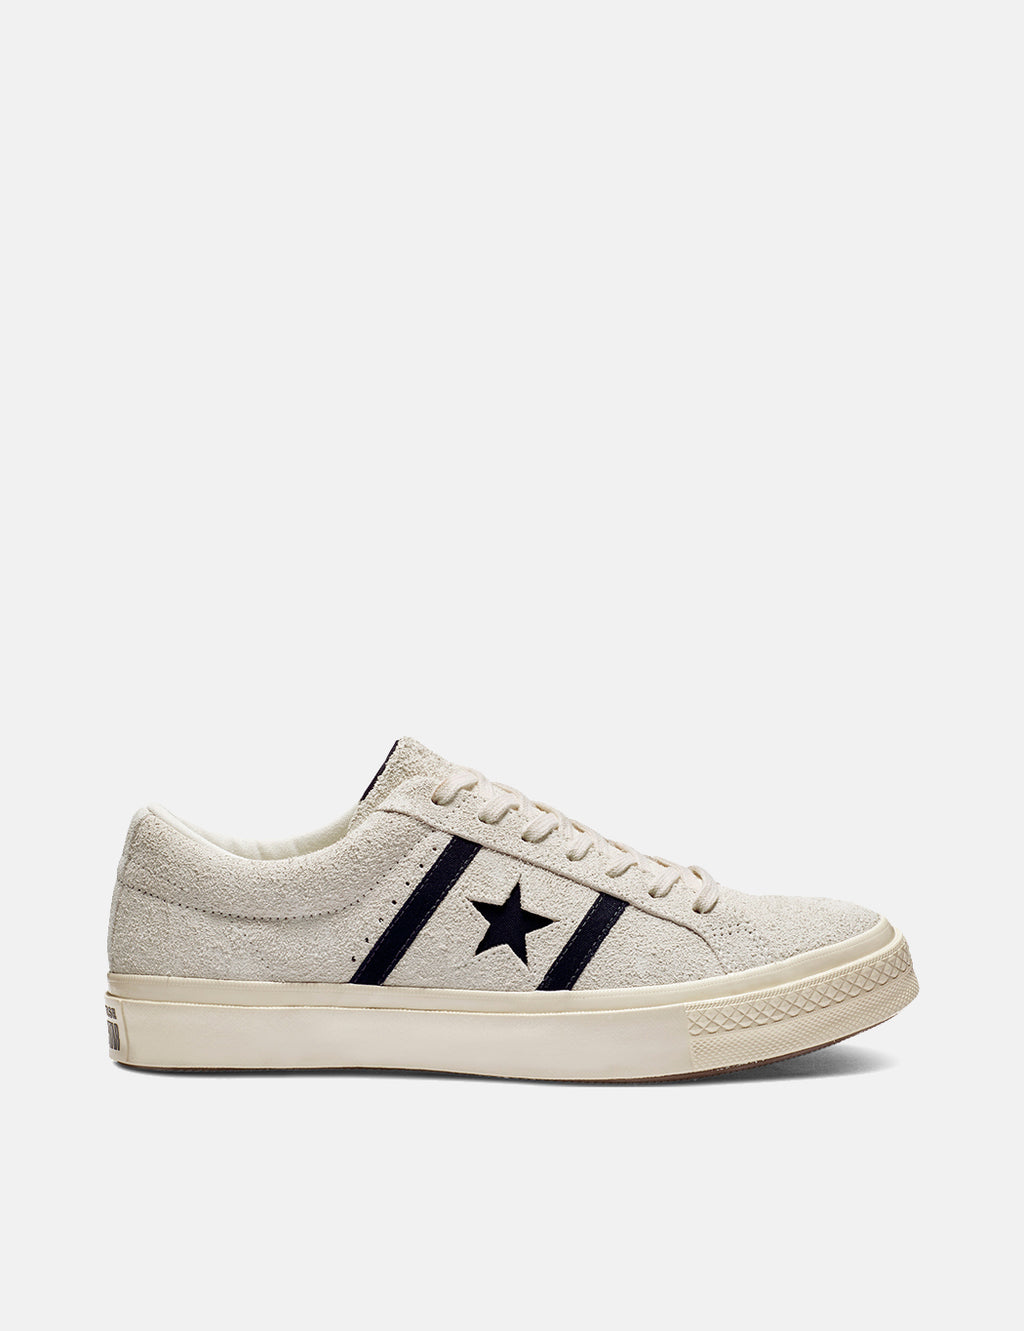 Converse One Star Academy Low Top (163269C) - Egret | URBAN EXCESS.